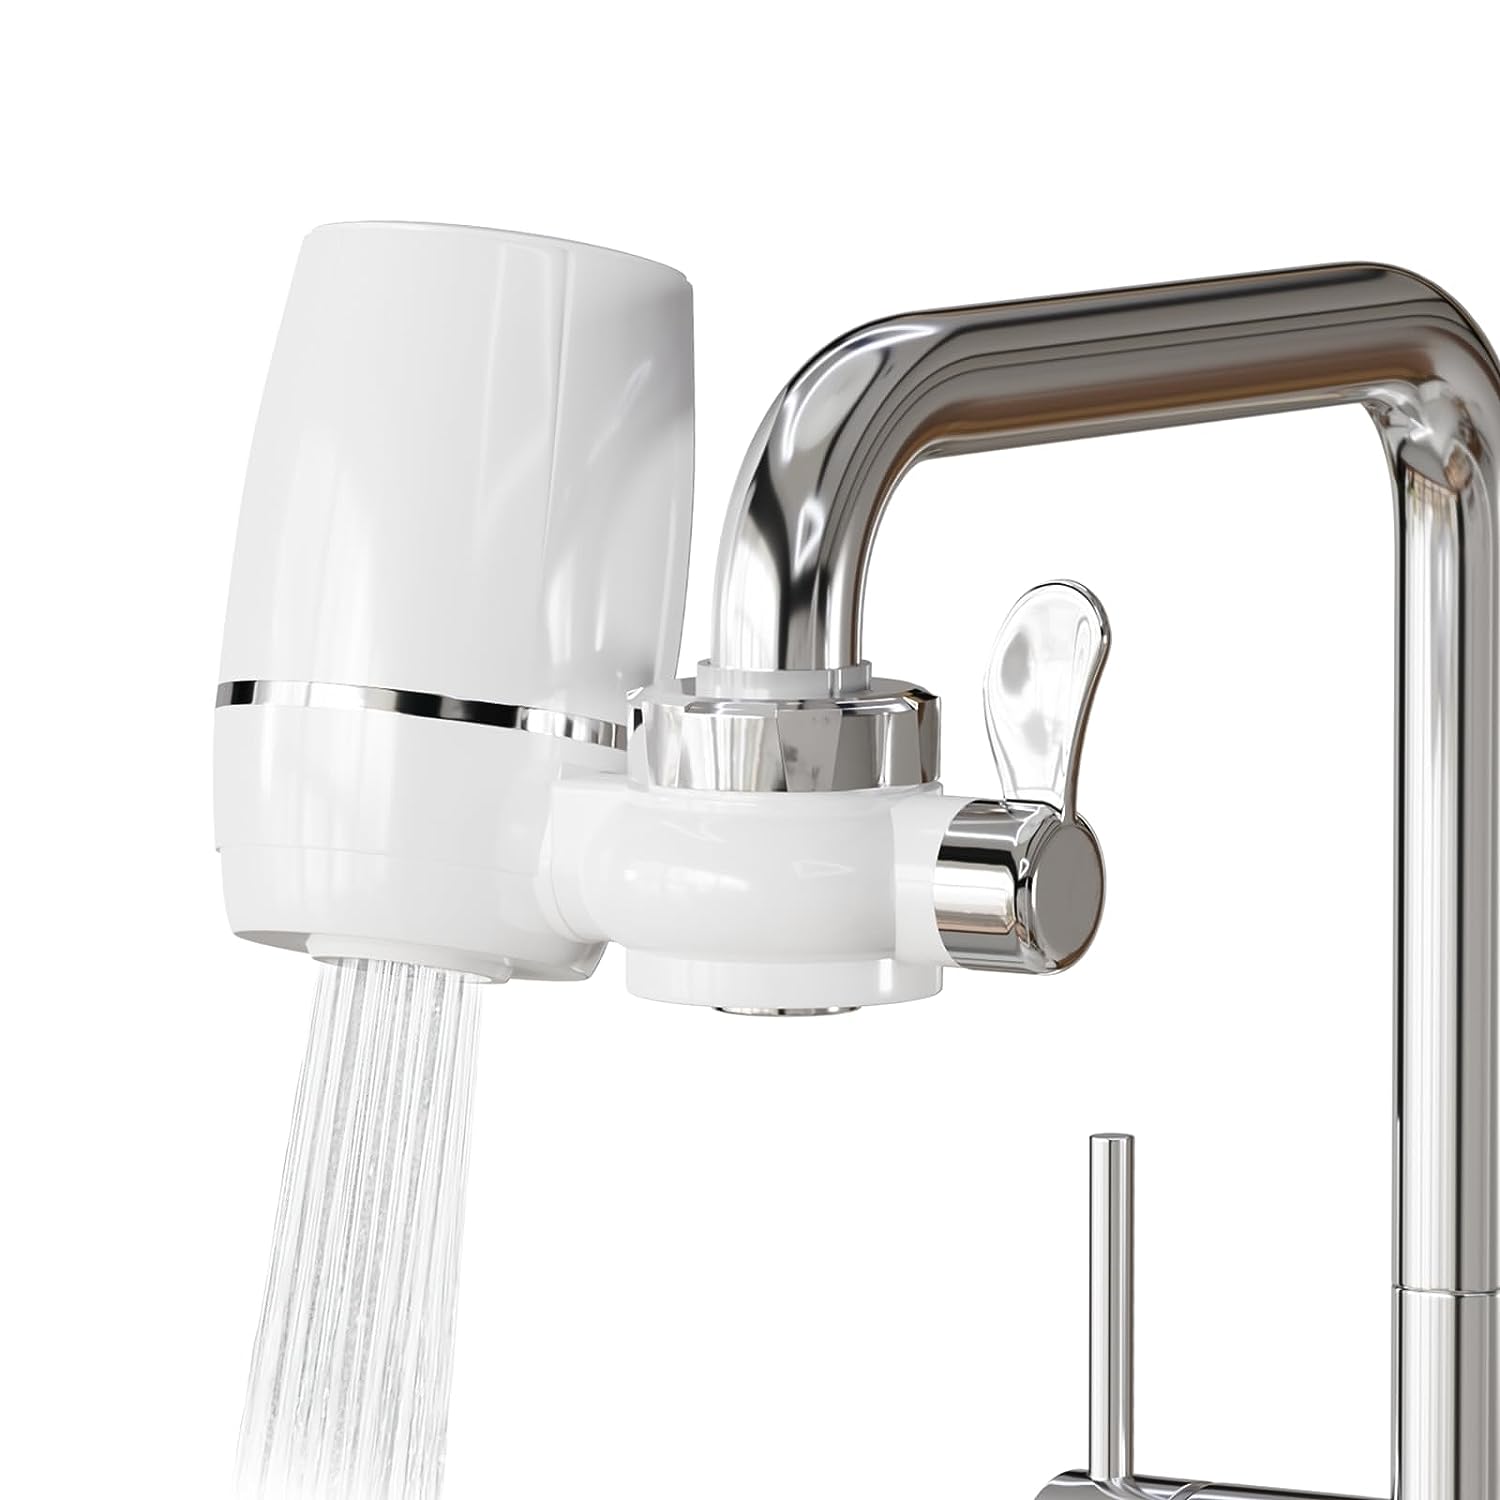 HOUSEHOLD WORLD Faucet Filter, Water Filtration [...]